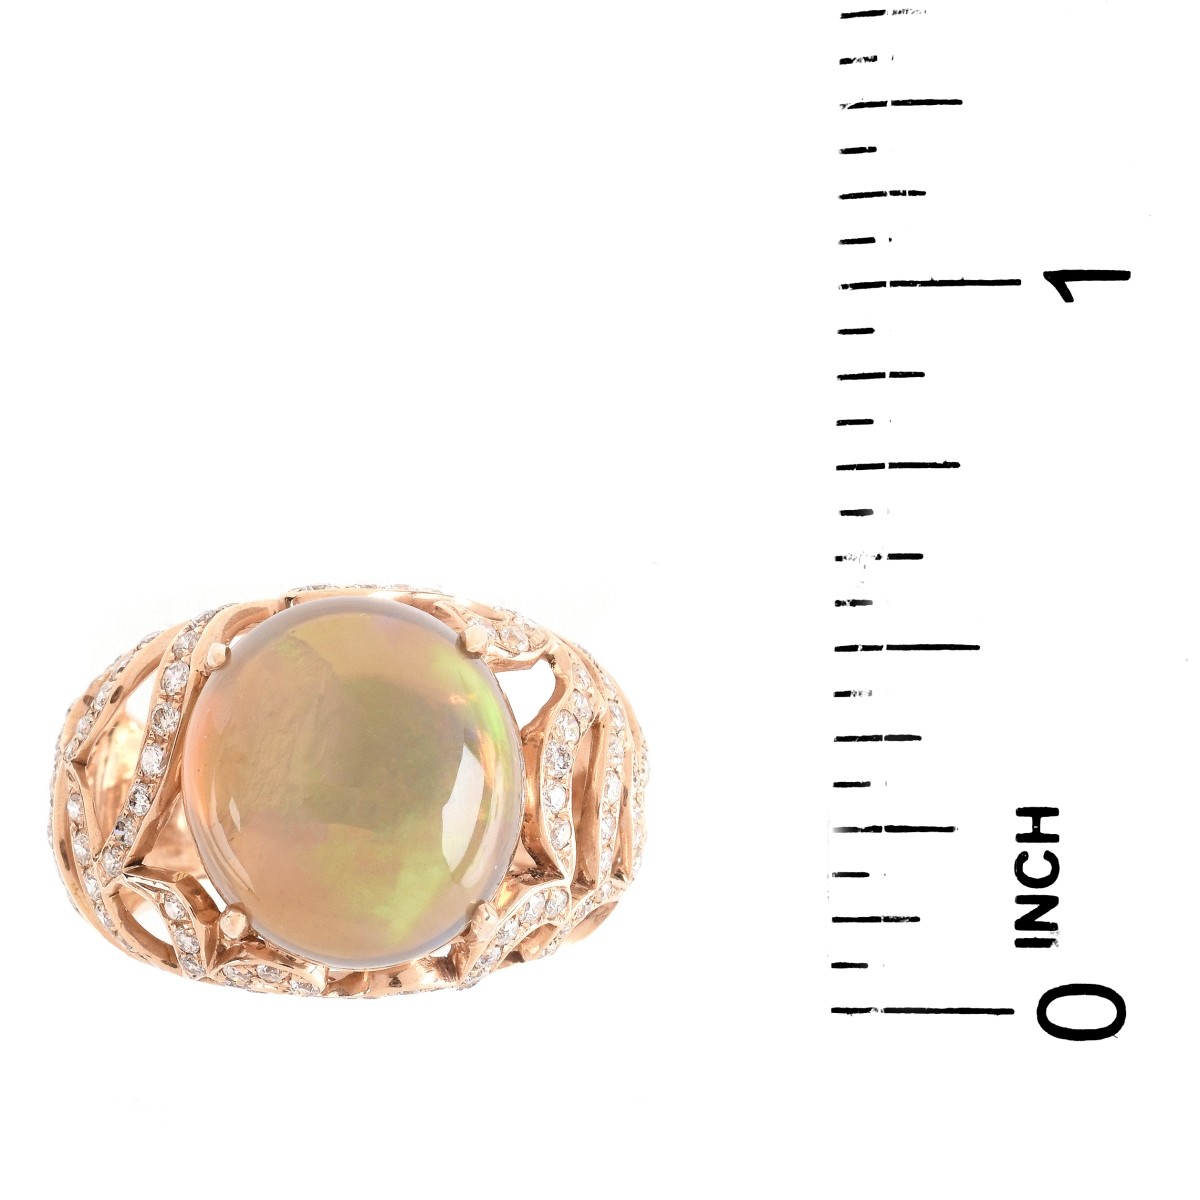 Opal, Diamond and 18K Gold Ring